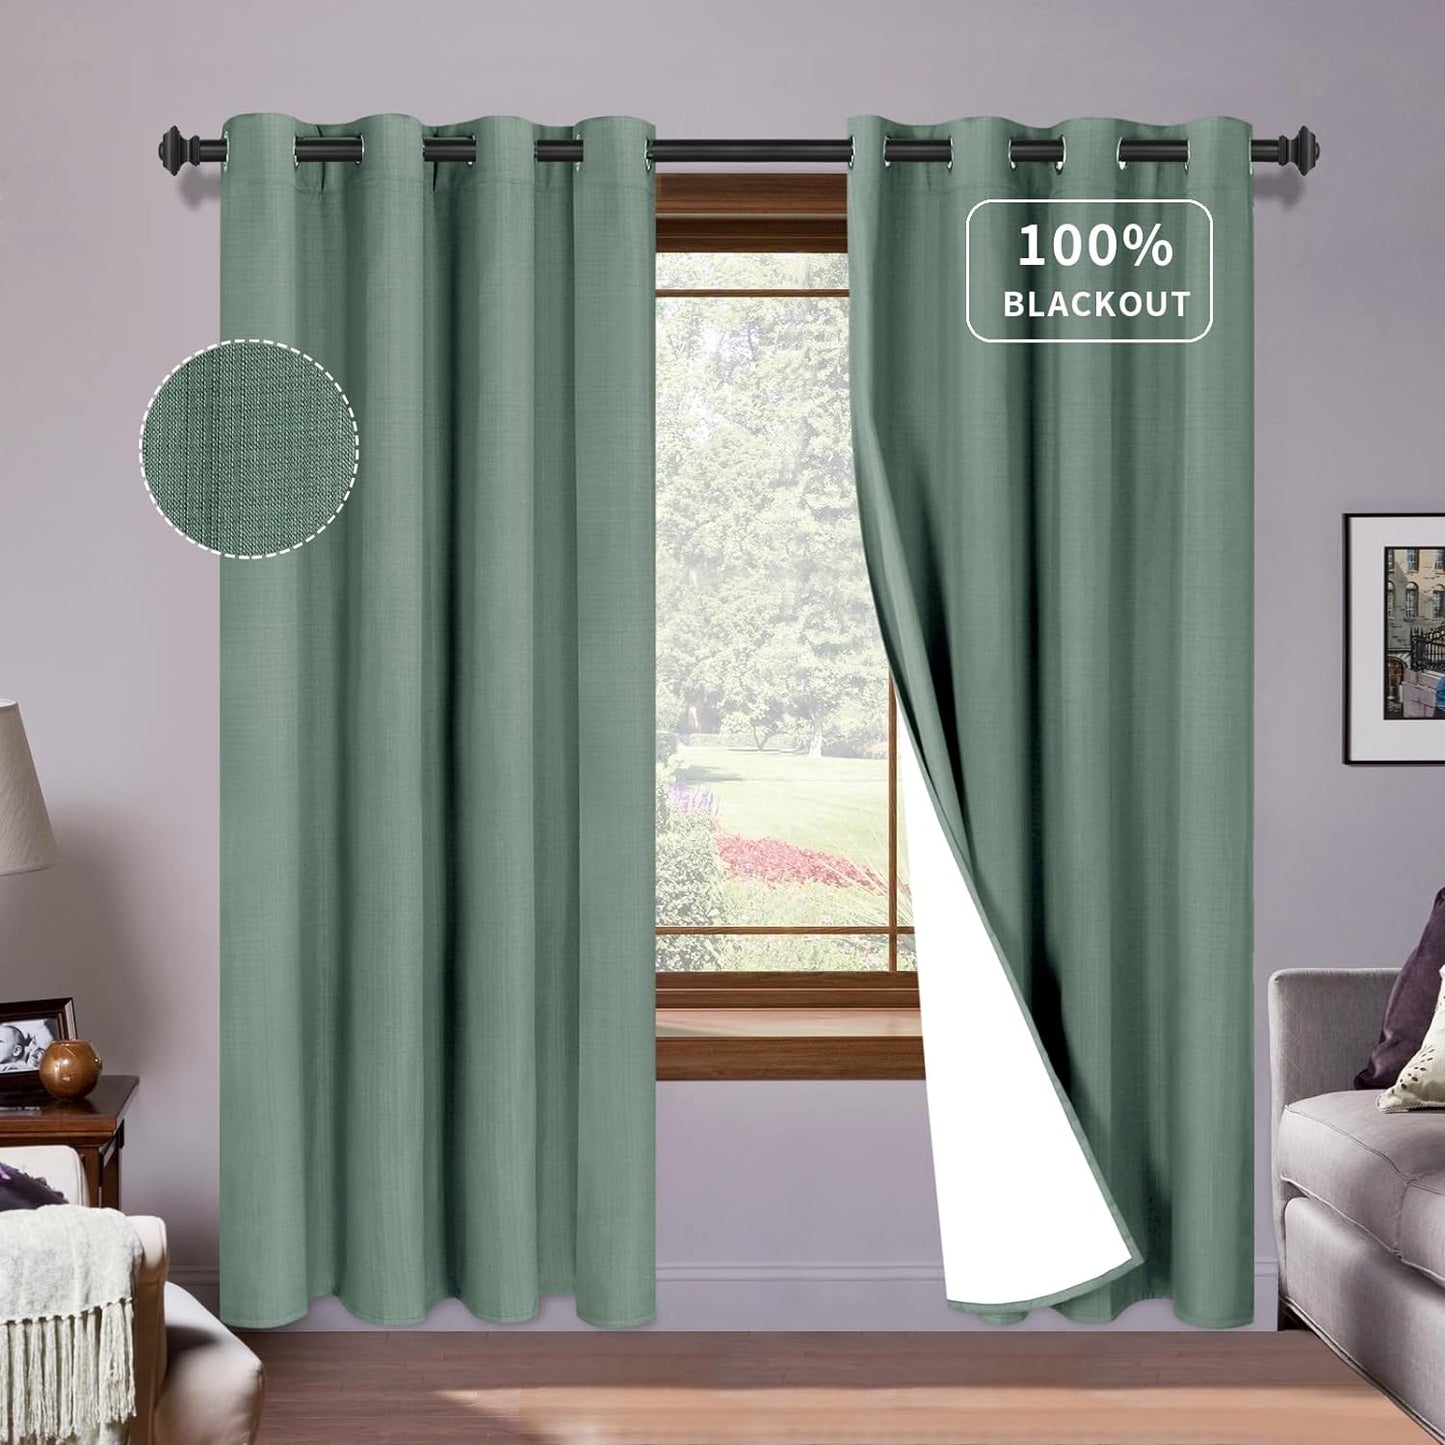 Purefit White Linen Blackout Curtains 84 Inches Long 100% Room Darkening Thermal Insulated Window Curtain Drapes for Bedroom Living Room Nursery with Anti-Rust Grommets & Energy Saving Liner, 2 Panels  PureFit Sage Green 52"W X 84"L 